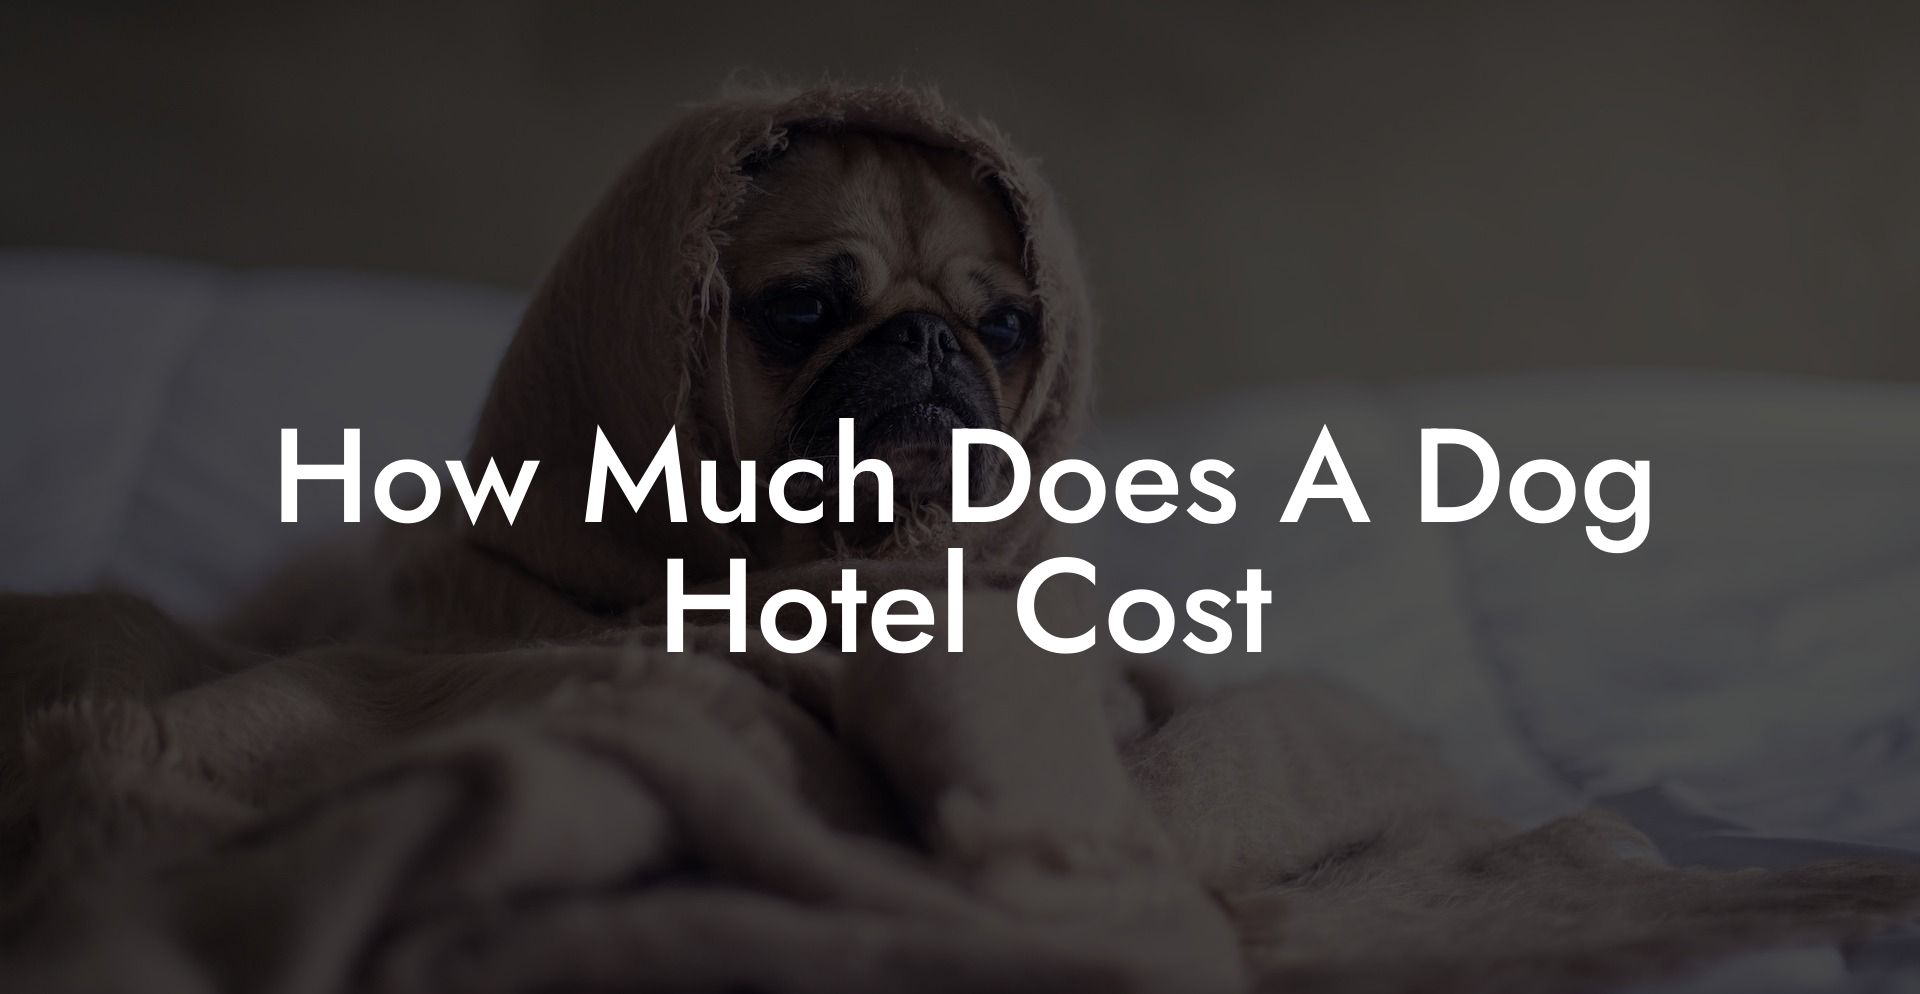 How Much Does A Dog Hotel Cost?